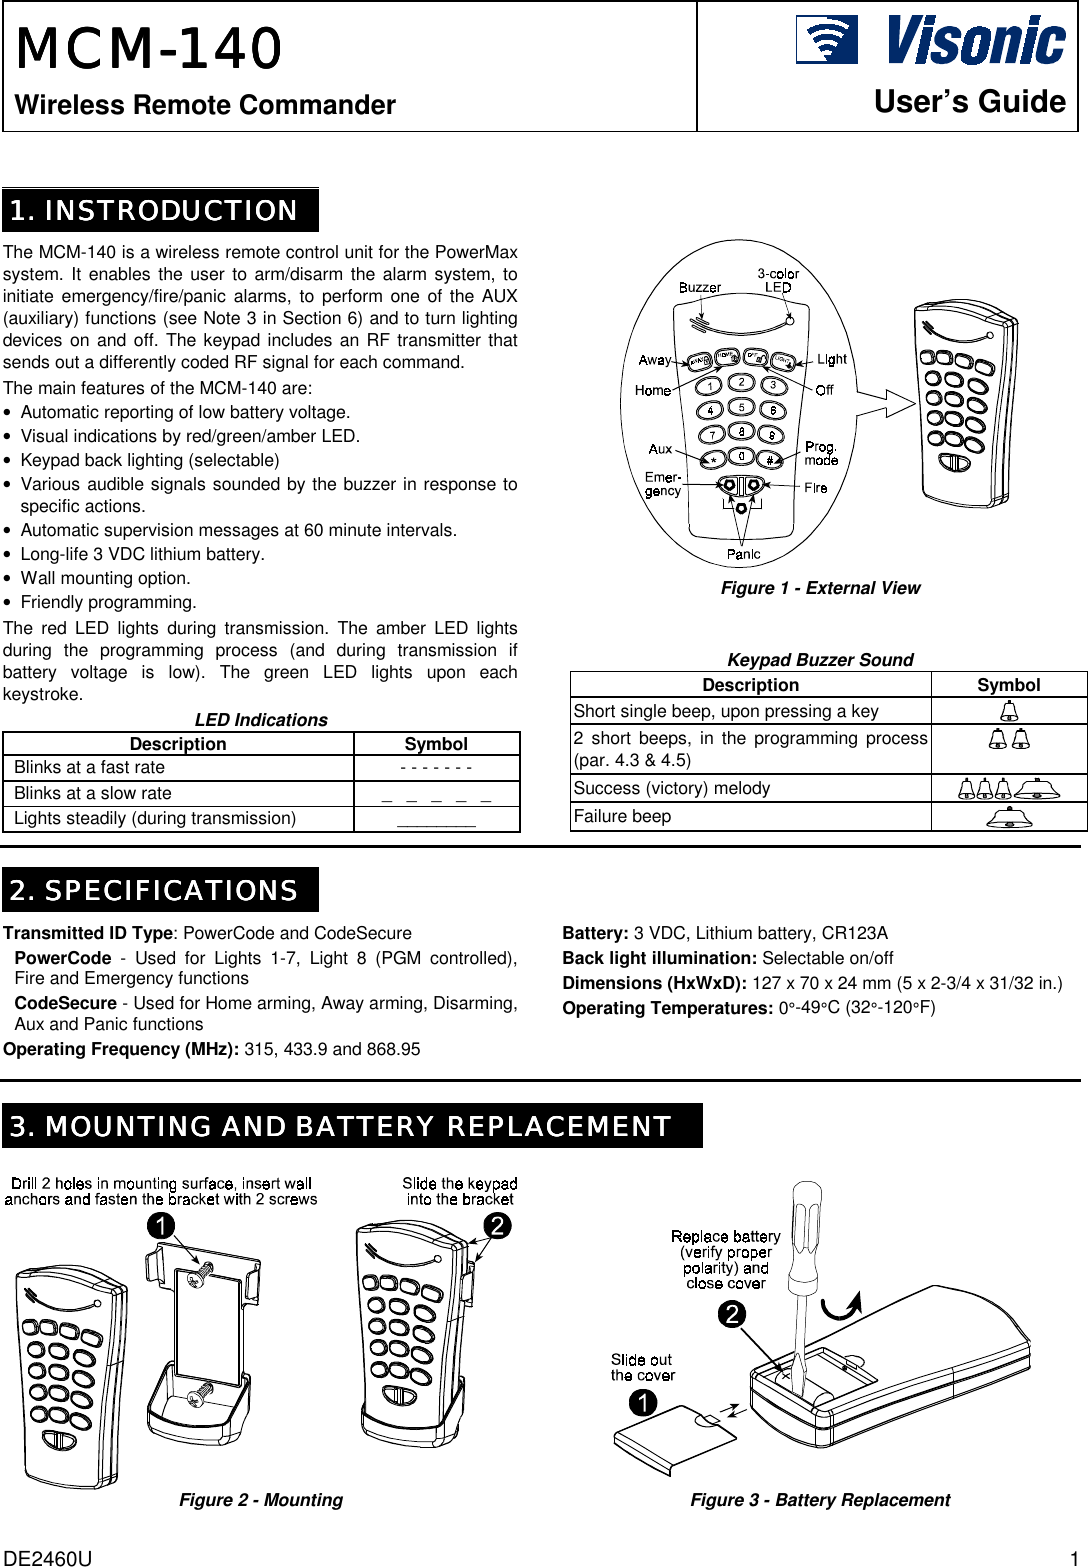 DE2460U  1 MCMMCMMCMMCM----140140140140    Wireless Remote Commander    User’s Guide  1. INSTRODUCTION1. INSTRODUCTION1. INSTRODUCTION1. INSTRODUCTION     The MCM-140 is a wireless remote control unit for the PowerMax system. It enables the user to arm/disarm the alarm system, to initiate emergency/fire/panic alarms, to perform one of the AUX (auxiliary) functions (see Note 3 in Section 6) and to turn lighting devices on and off. The keypad includes an RF transmitter that sends out a differently coded RF signal for each command.  The main features of the MCM-140 are: •  Automatic reporting of low battery voltage. •  Visual indications by red/green/amber LED. •  Keypad back lighting (selectable) •  Various audible signals sounded by the buzzer in response to specific actions.  •  Automatic supervision messages at 60 minute intervals. •  Long-life 3 VDC lithium battery. •  Wall mounting option. •  Friendly programming. The red LED lights during transmission. The amber LED lights during the programming process (and during transmission if battery voltage is low). The green LED lights upon each keystroke. LED Indications Description Symbol Blinks at a fast rate  - - - - - - -  Blinks at a slow rate  _   _   _   _   _  Lights steadily (during transmission)  ________   Figure 1 - External View   Keypad Buzzer Sound  Description Symbol Short single beep, upon pressing a key   2 short beeps, in the programming process (par. 4.3 &amp; 4.5)     Success (victory) melody   Failure beep      2. SPECIFICATIONS2. SPECIFICATIONS2. SPECIFICATIONS2. SPECIFICATIONS    Transmitted ID Type: PowerCode and CodeSecure PowerCode - Used for Lights 1-7, Light 8 (PGM controlled), Fire and Emergency functions CodeSecure - Used for Home arming, Away arming, Disarming, Aux and Panic functions Operating Frequency (MHz): 315, 433.9 and 868.95 Battery: 3 VDC, Lithium battery, CR123A Back light illumination: Selectable on/off Dimensions (HxWxD): 127 x 70 x 24 mm (5 x 2-3/4 x 31/32 in.) Operating Temperatures: 0°-49°C (32°-120°F)    3. MOUNTING AND BATTERY REPLACEMENT3. MOUNTING AND BATTERY REPLACEMENT3. MOUNTING AND BATTERY REPLACEMENT3. MOUNTING AND BATTERY REPLACEMENT Figure 2 - Mounting  Figure 3 - Battery Replacement 